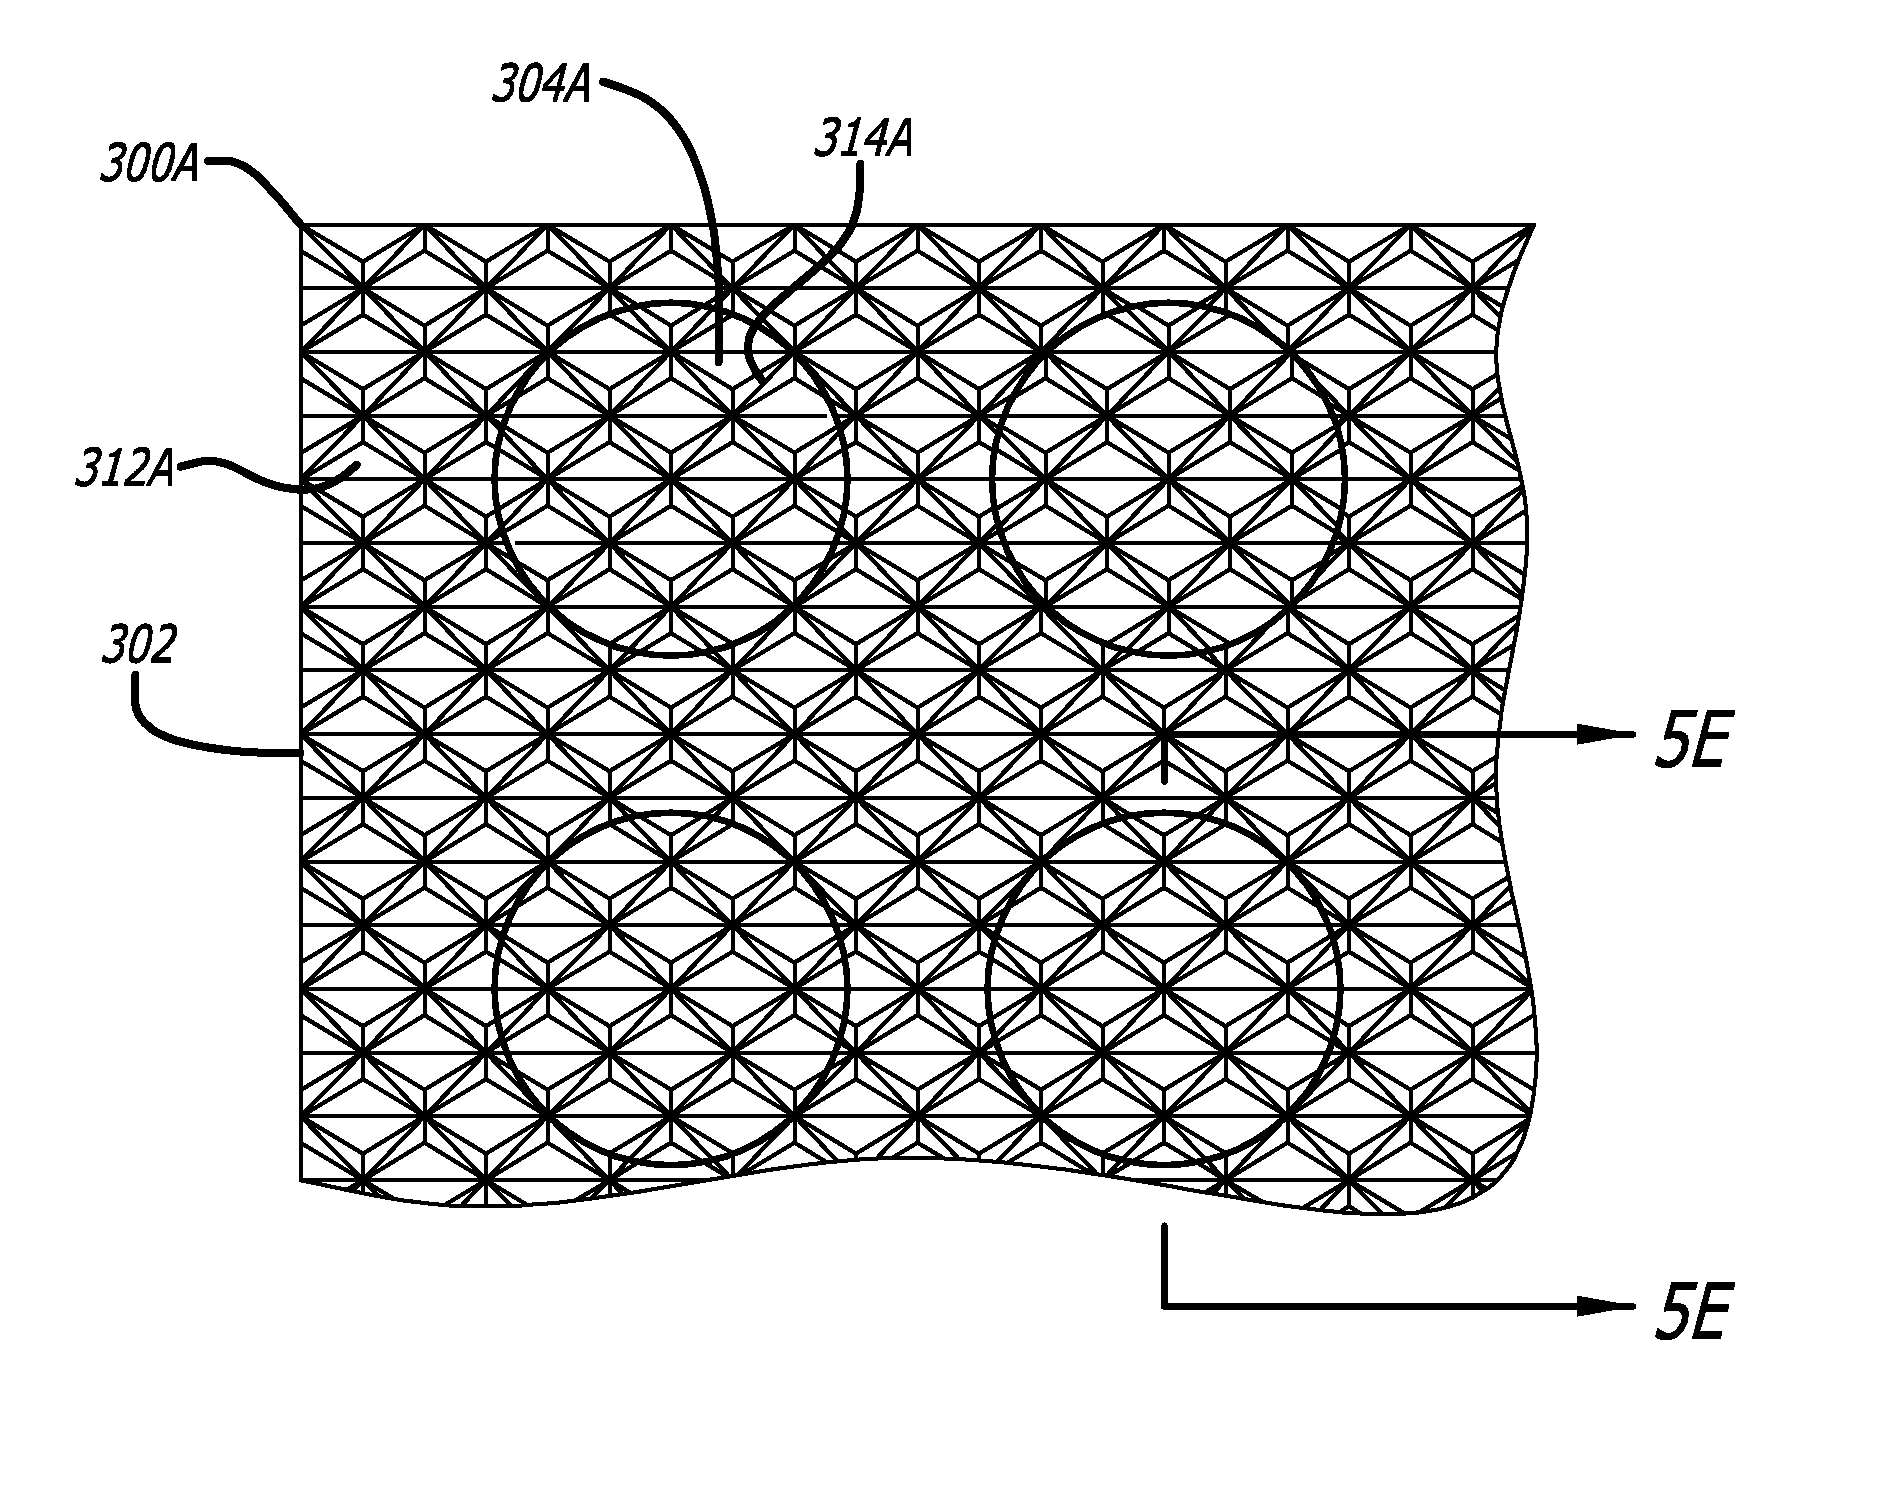 Patterned sheeting with periodic rotated patterned regions